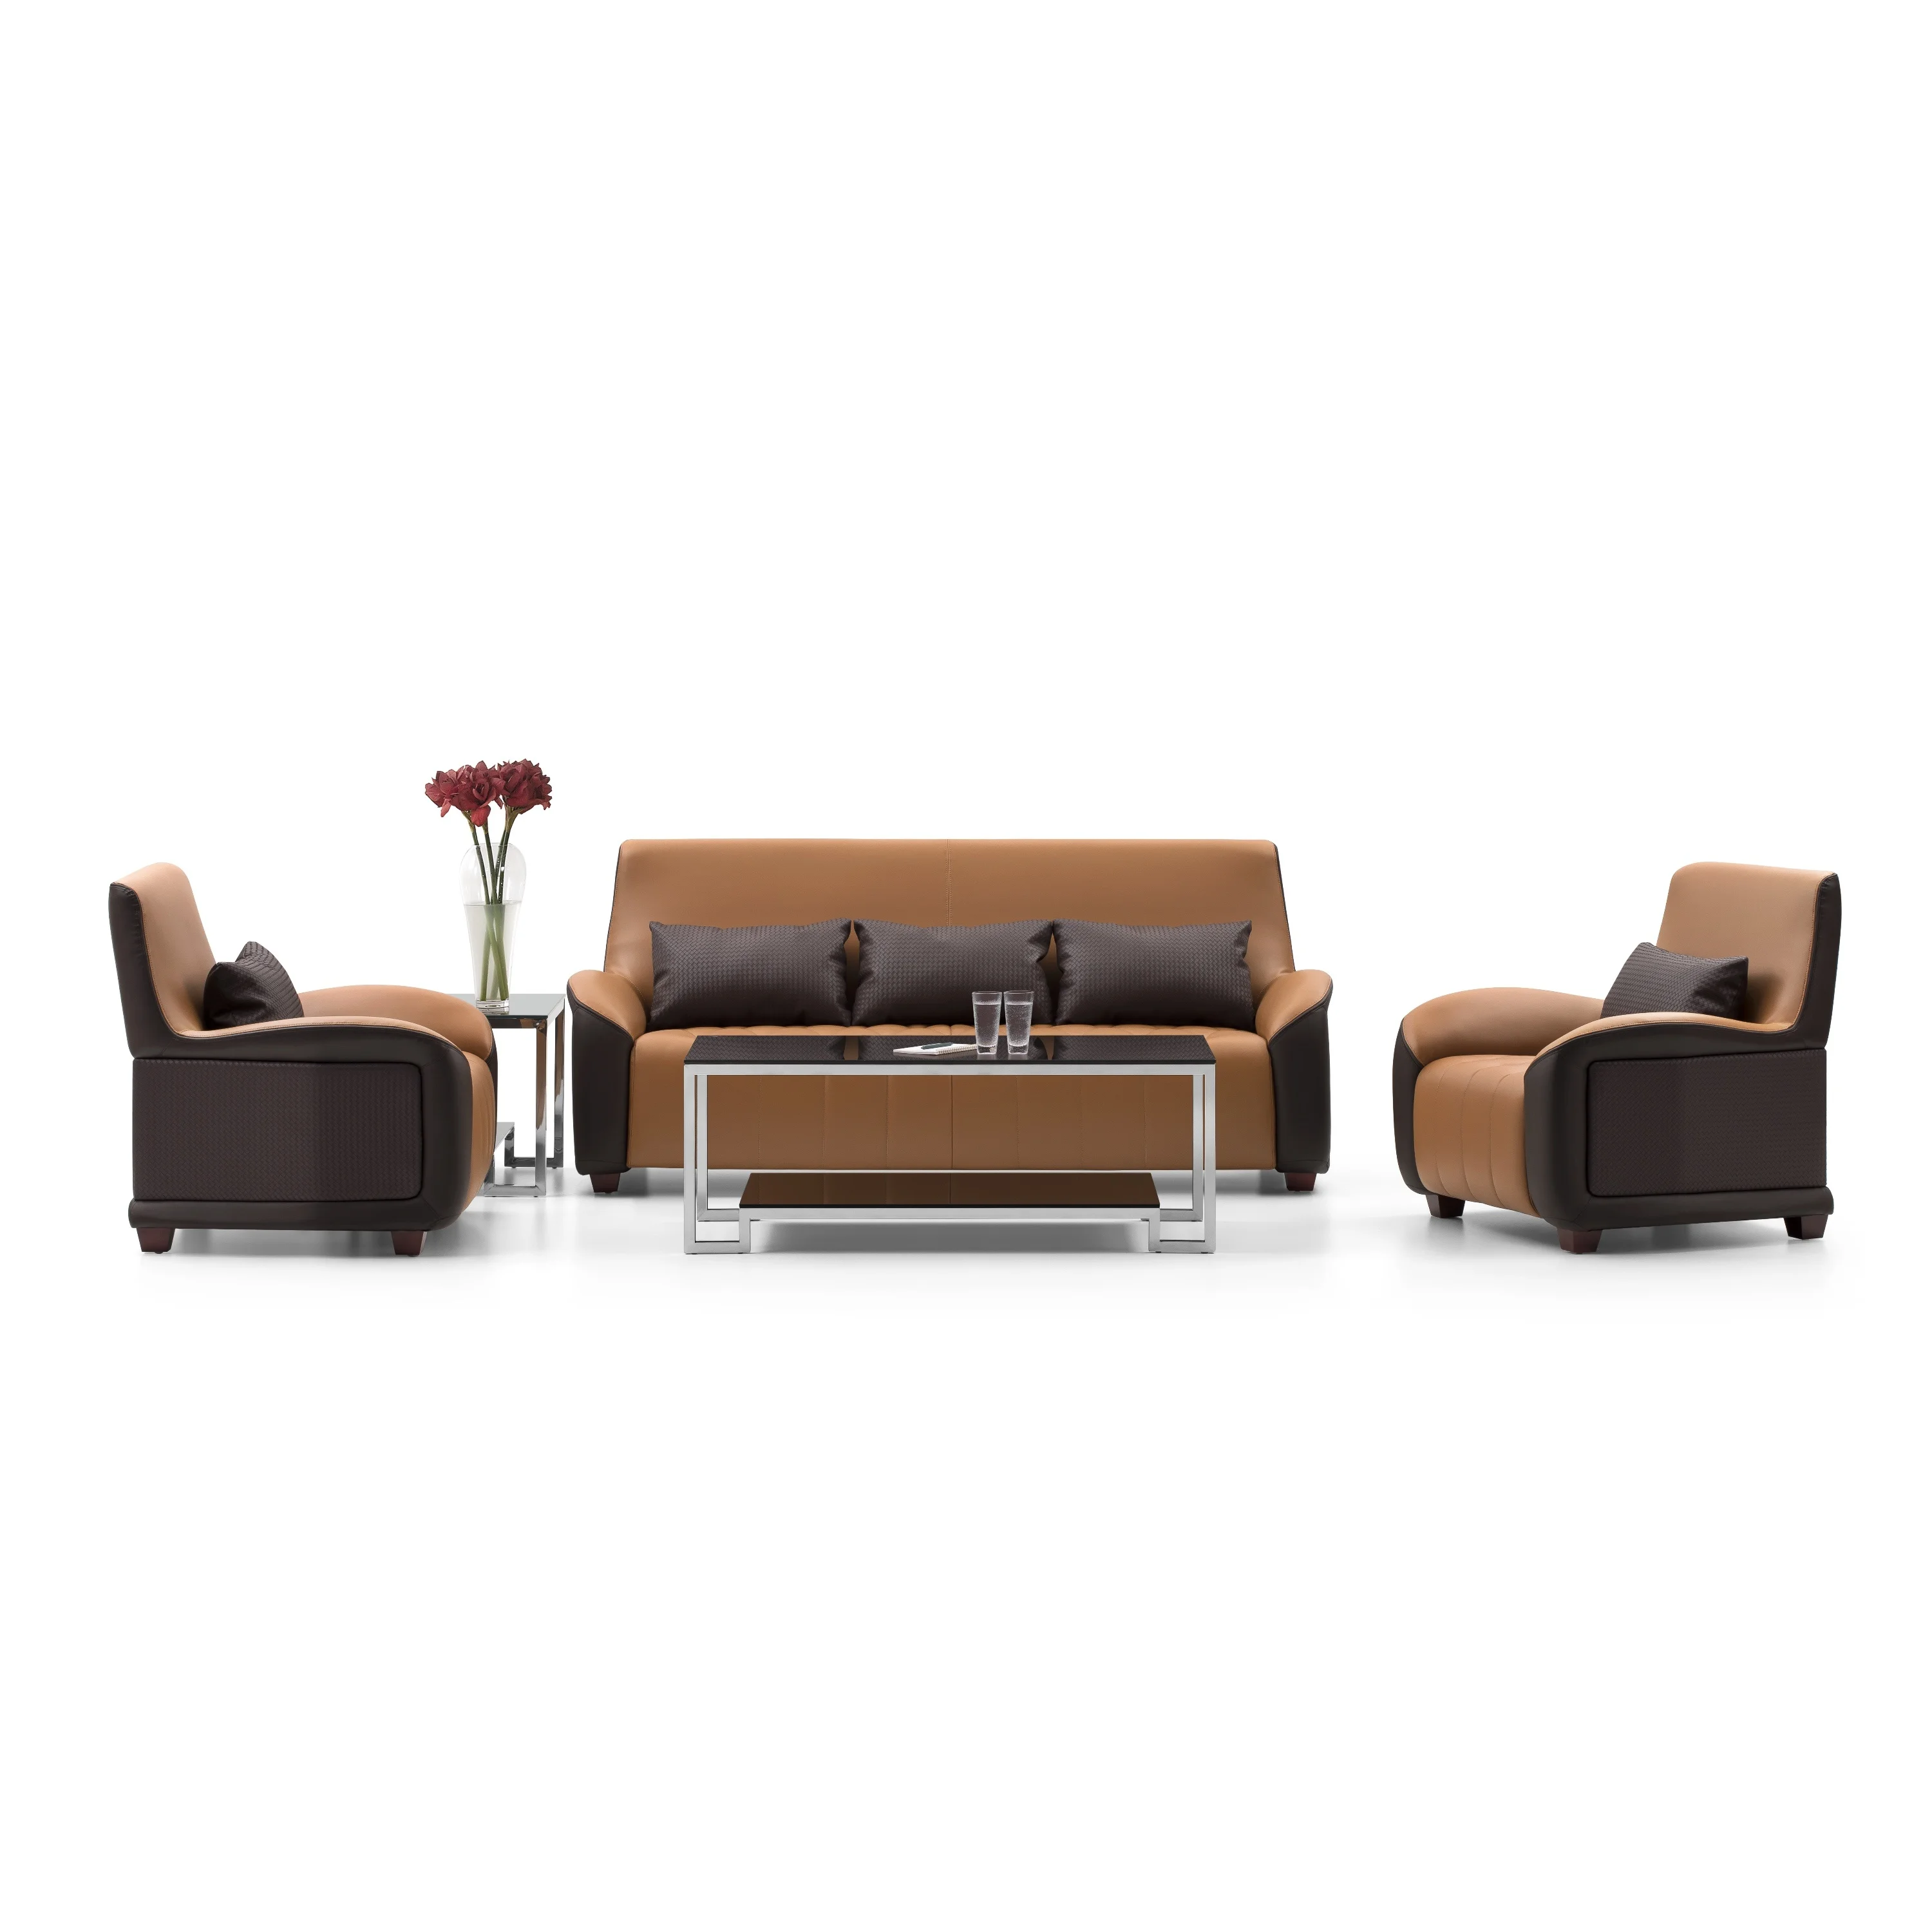 High quality cheap price contemporary brown and tan PU leather 3 seat sofa set furniture office